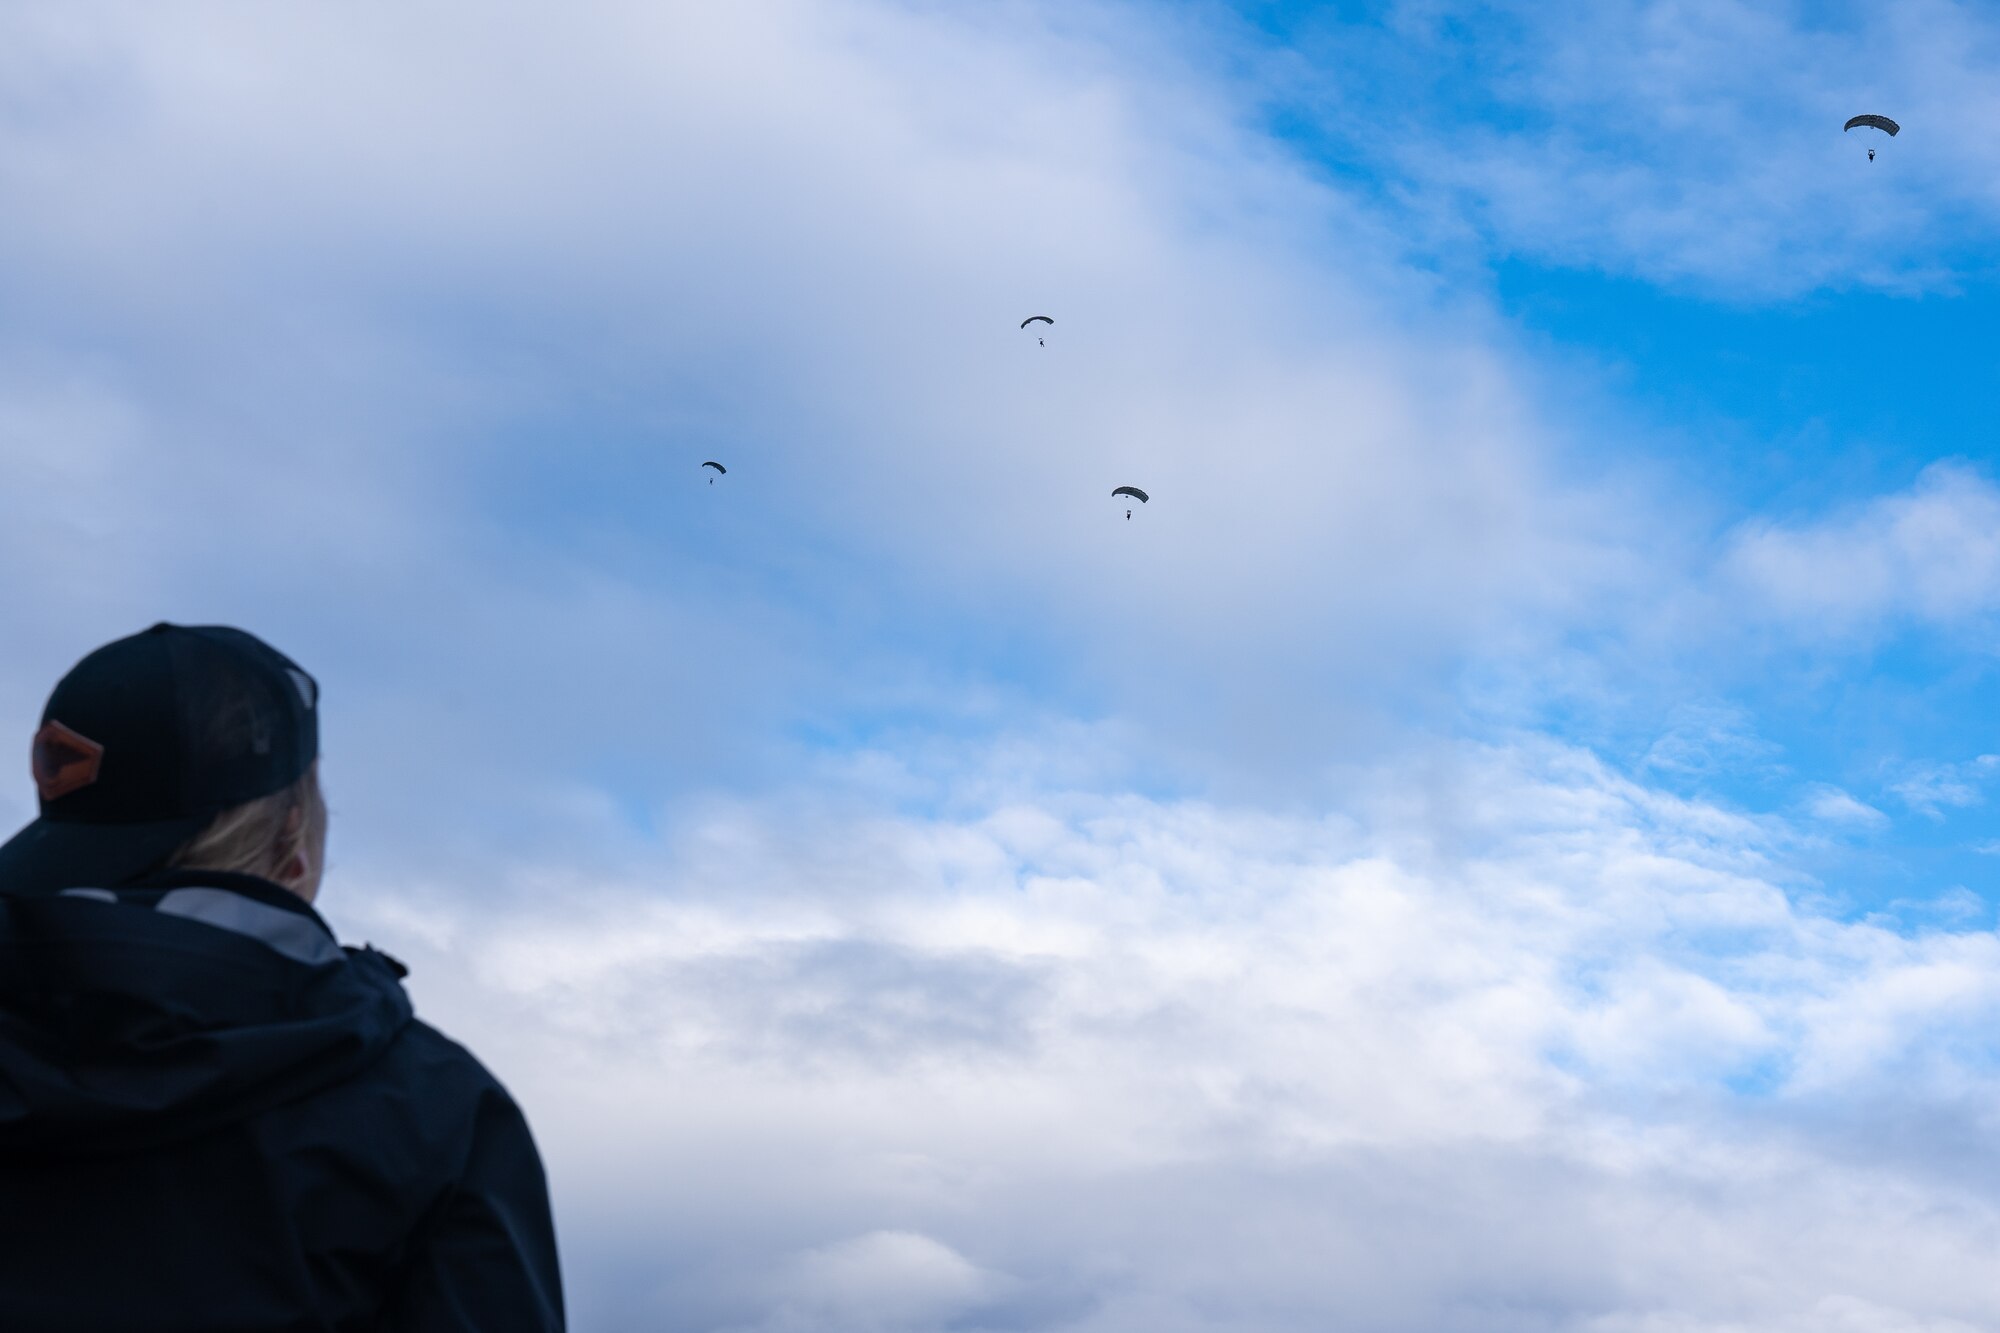 U.S. Air force Master Sgt. Sara Jones, an aircrew flight equipment technician assigned to the 212th Rescue Squadron, Alaska Air National Guard, looks on as 212th Rescue Squadron pararescuemen descend upon Malemute Drop Zone during a training event at Joint Base Elmendorf-Richardson.